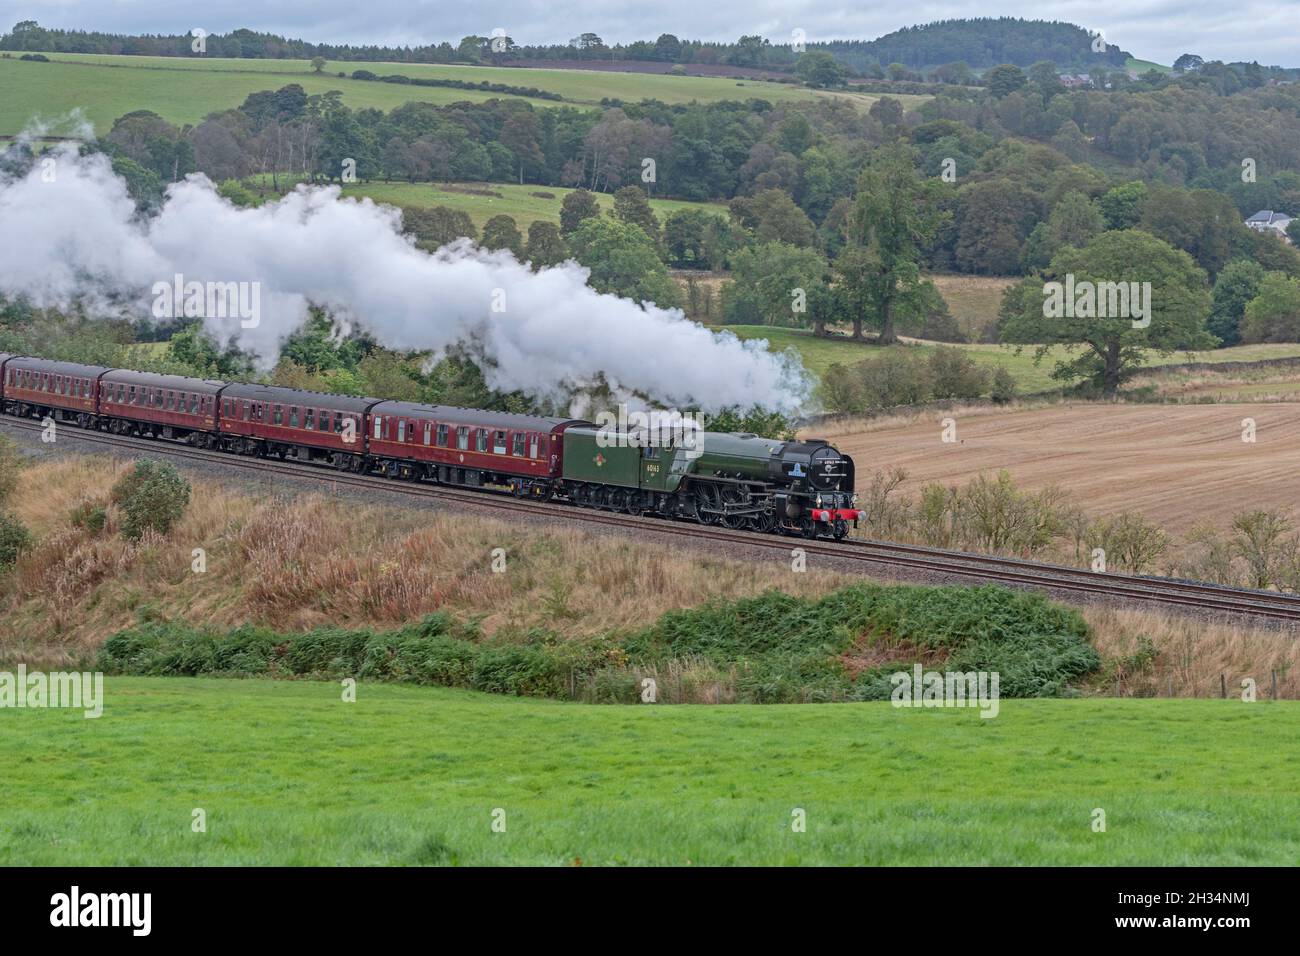 'The Ribblehead Rambler' hauled by steam locomotive Tornado 60163 from Carlisle to Hull at Armathwaite corner on the Settle Line Stock Photo